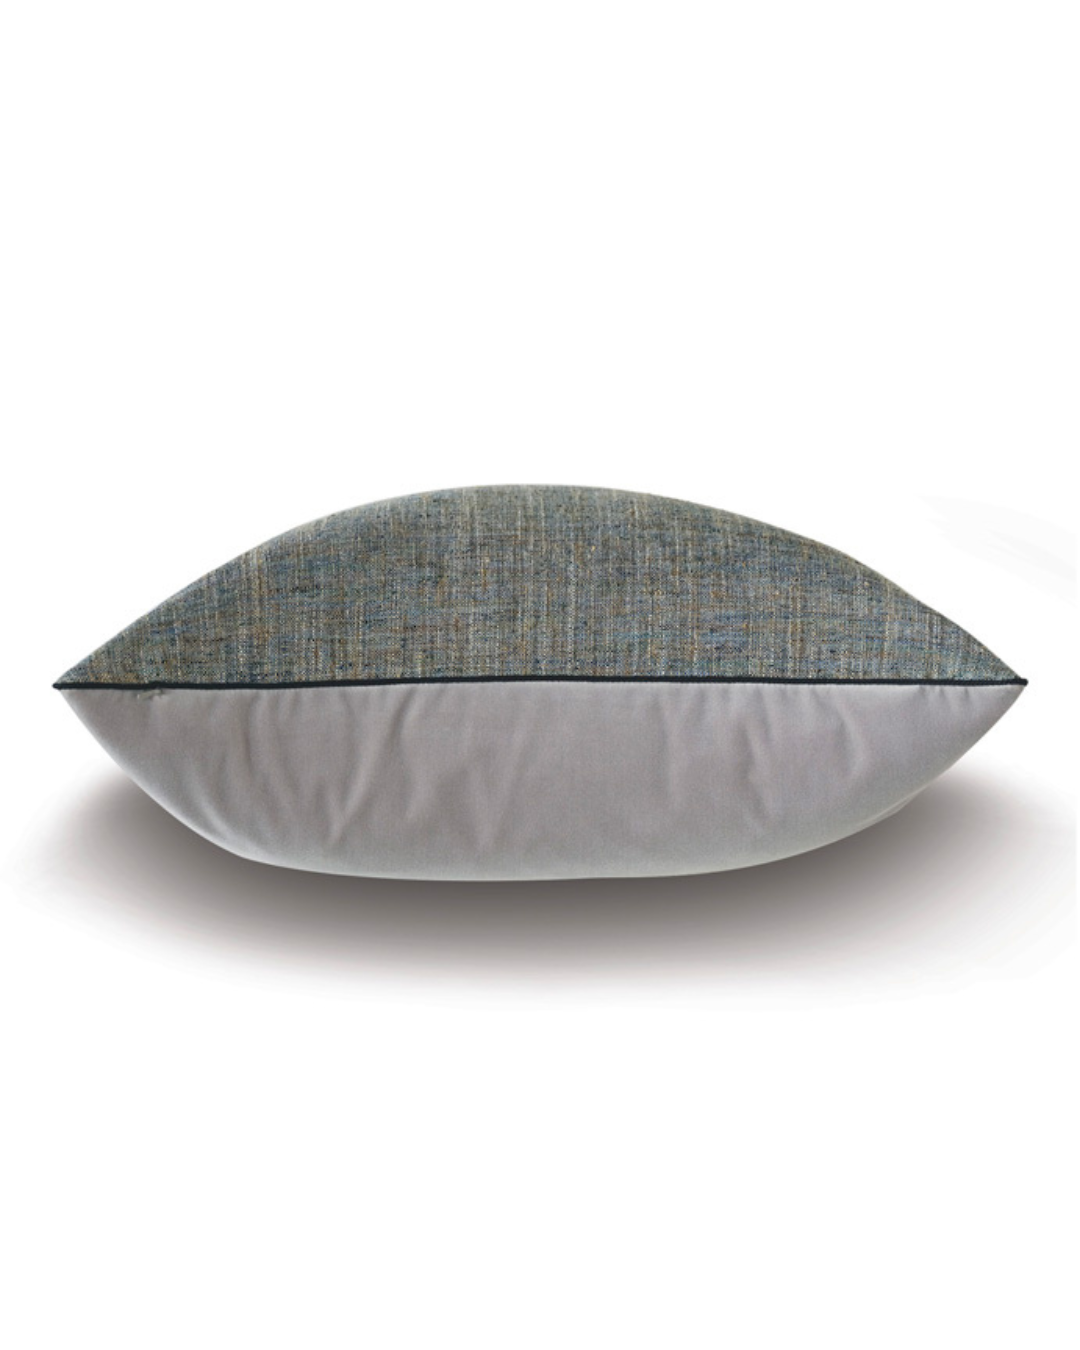 A rectangular, two-toned decorative pillow with a grey bottom and a textured, blue-green top. The cushion is shown from a side view, highlighting its contrasting fabric design and plush appearance, thanks to the down feather insert that adds both comfort and elegance. This is the WOVEN DECORATIVE PILLOW IN TEAL 22x22 by Eastern Accents.